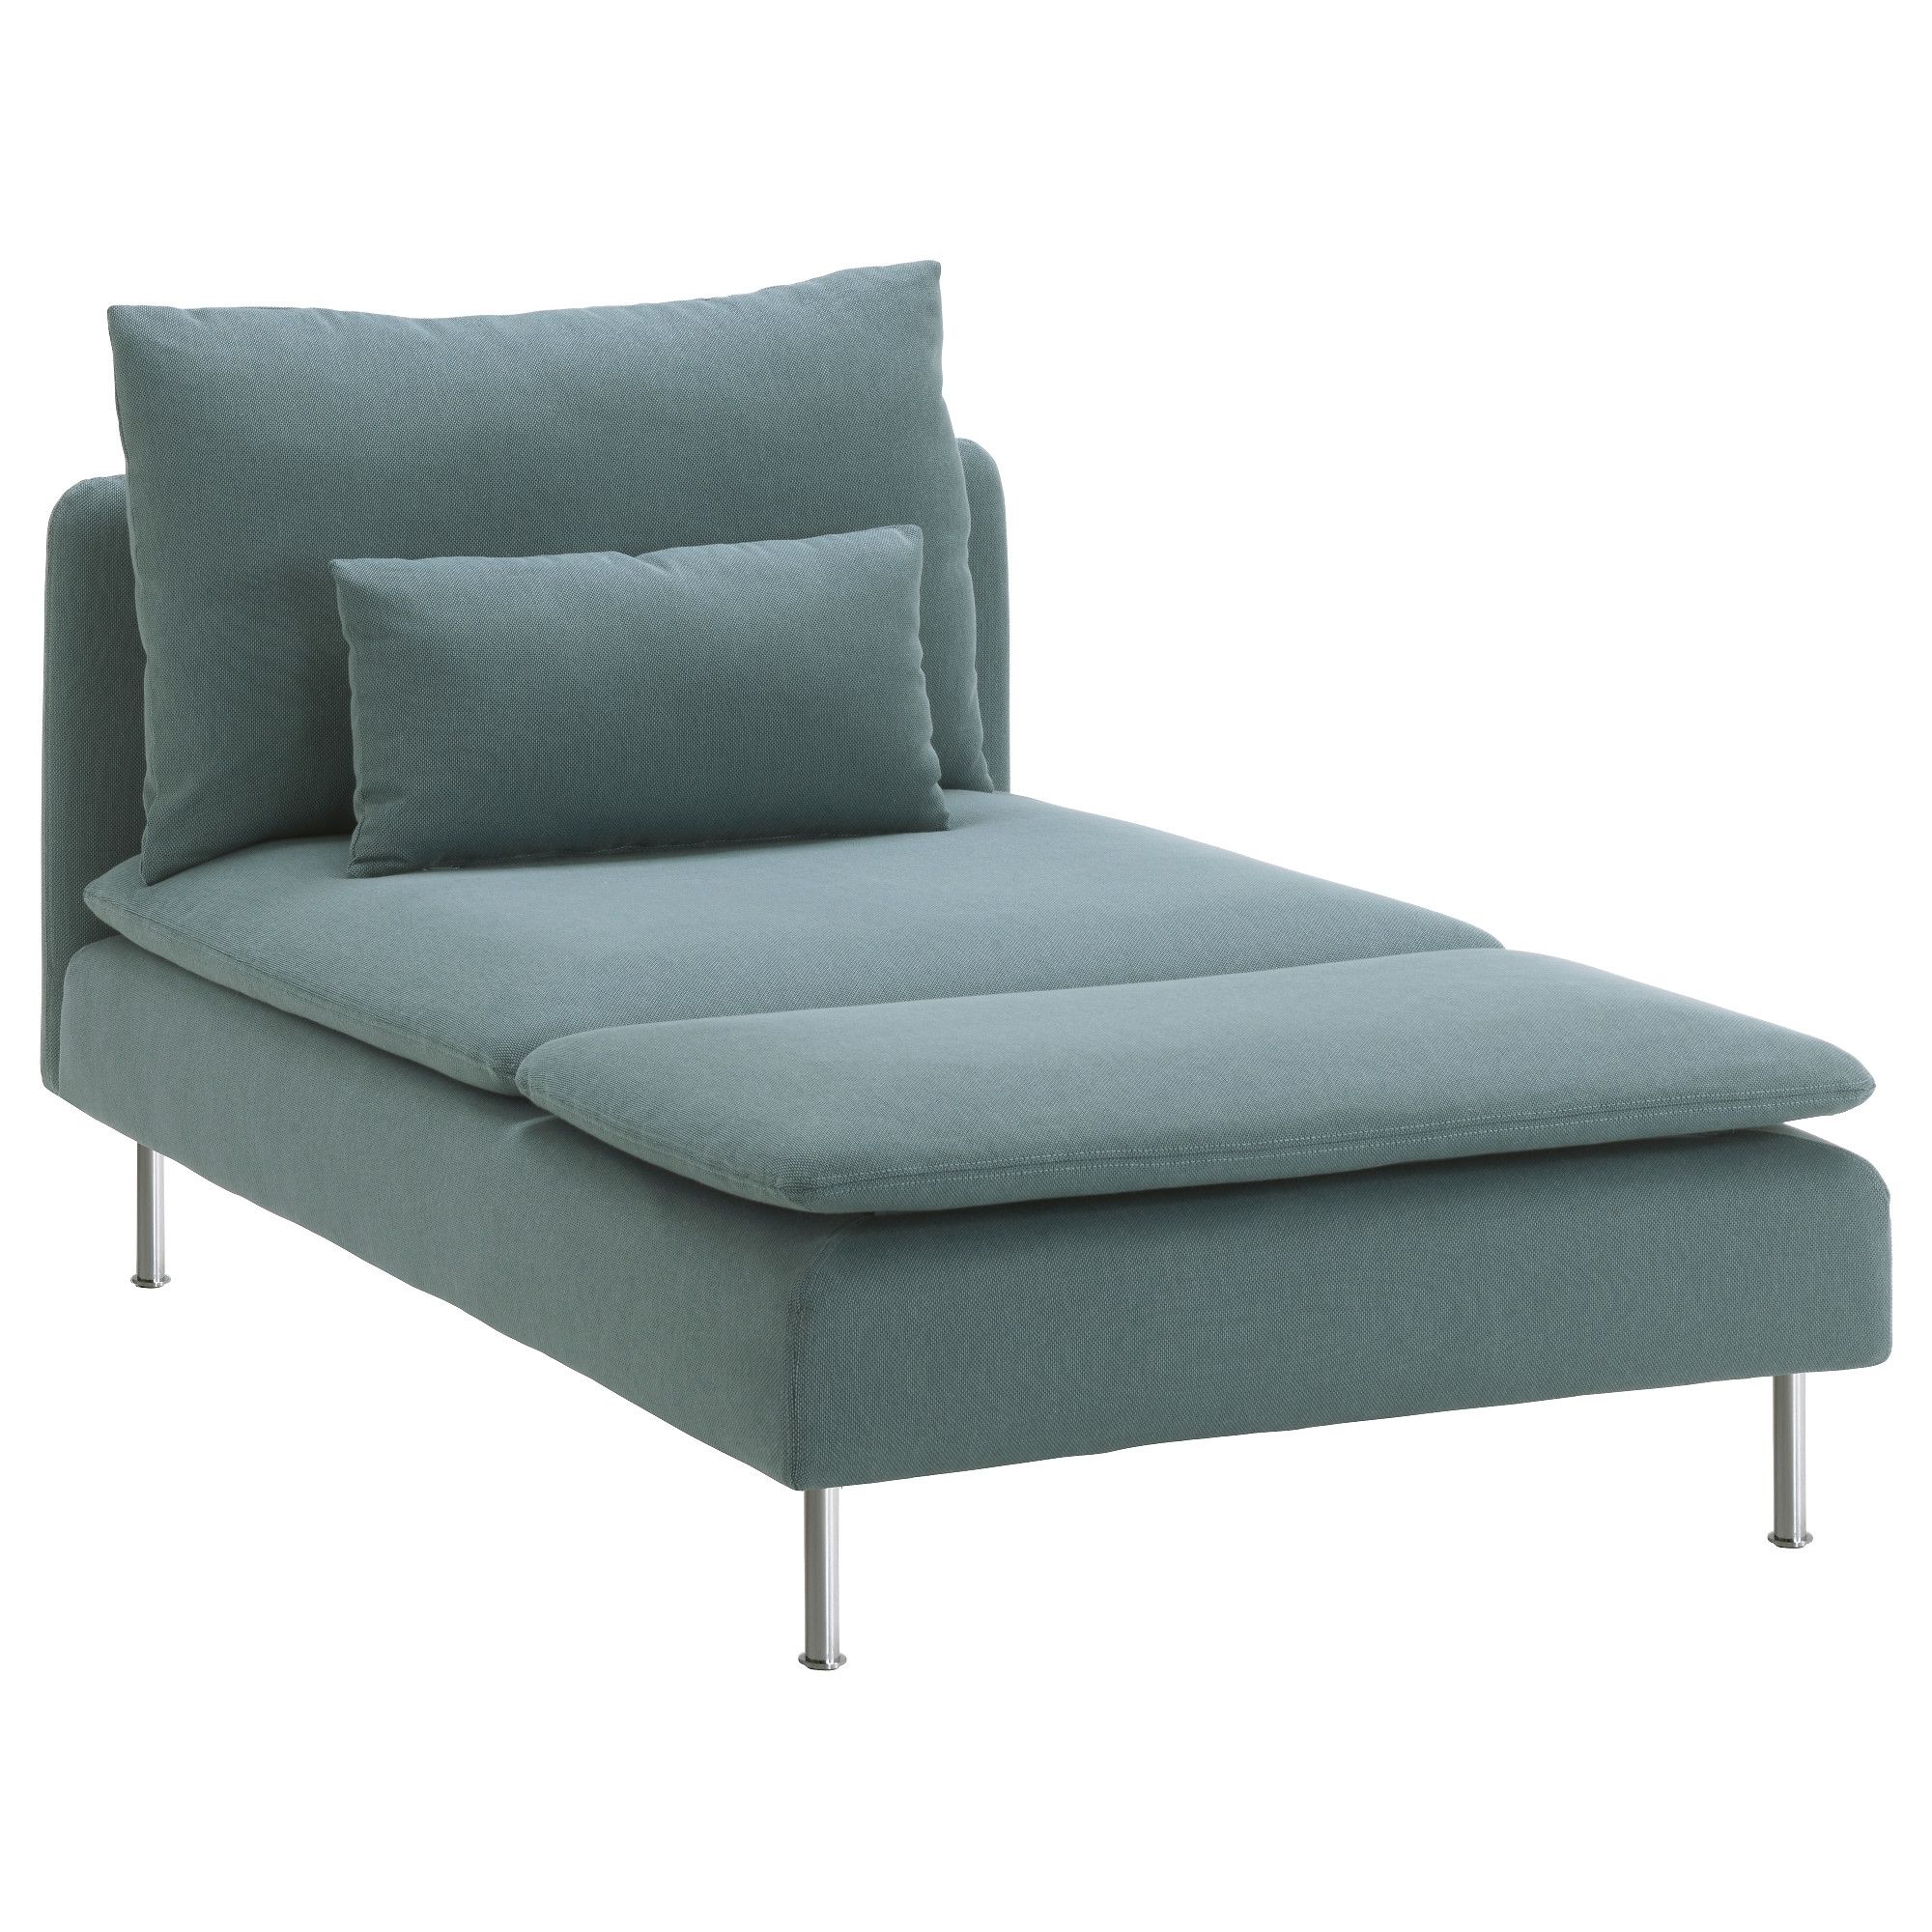 Ikea Chaise Lounge Chairs Within Most Recently Released Söderhamn Chaise – Samsta Dark Gray – Ikea (View 11 of 15)